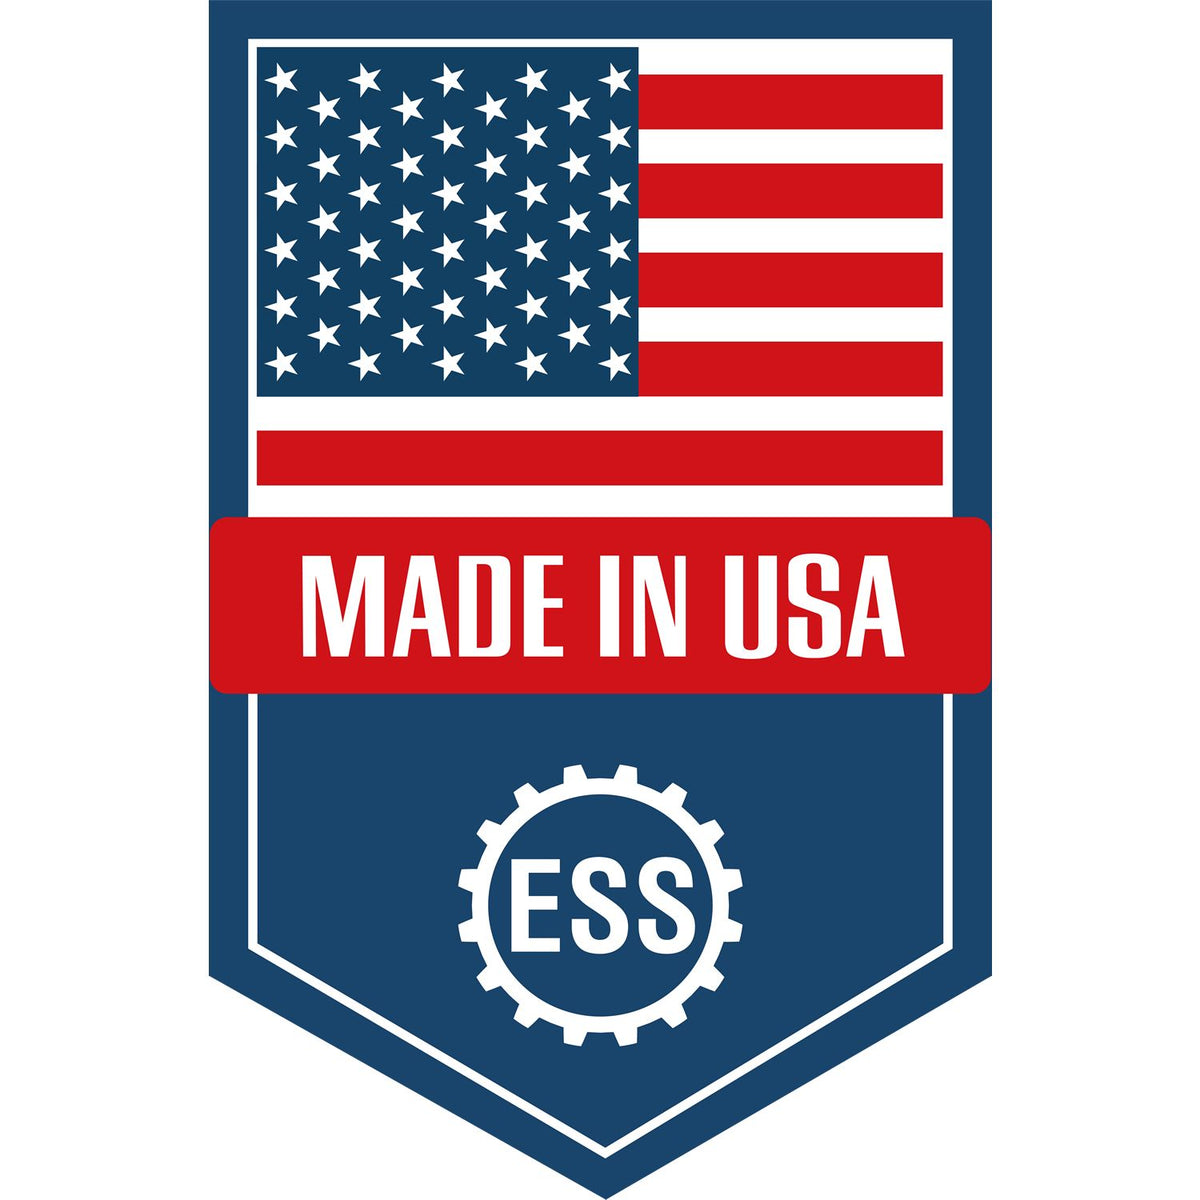 An icon or graphic with an american flag and text reading Made in USA for the Maryland Landscape Architectural Seal Stamp